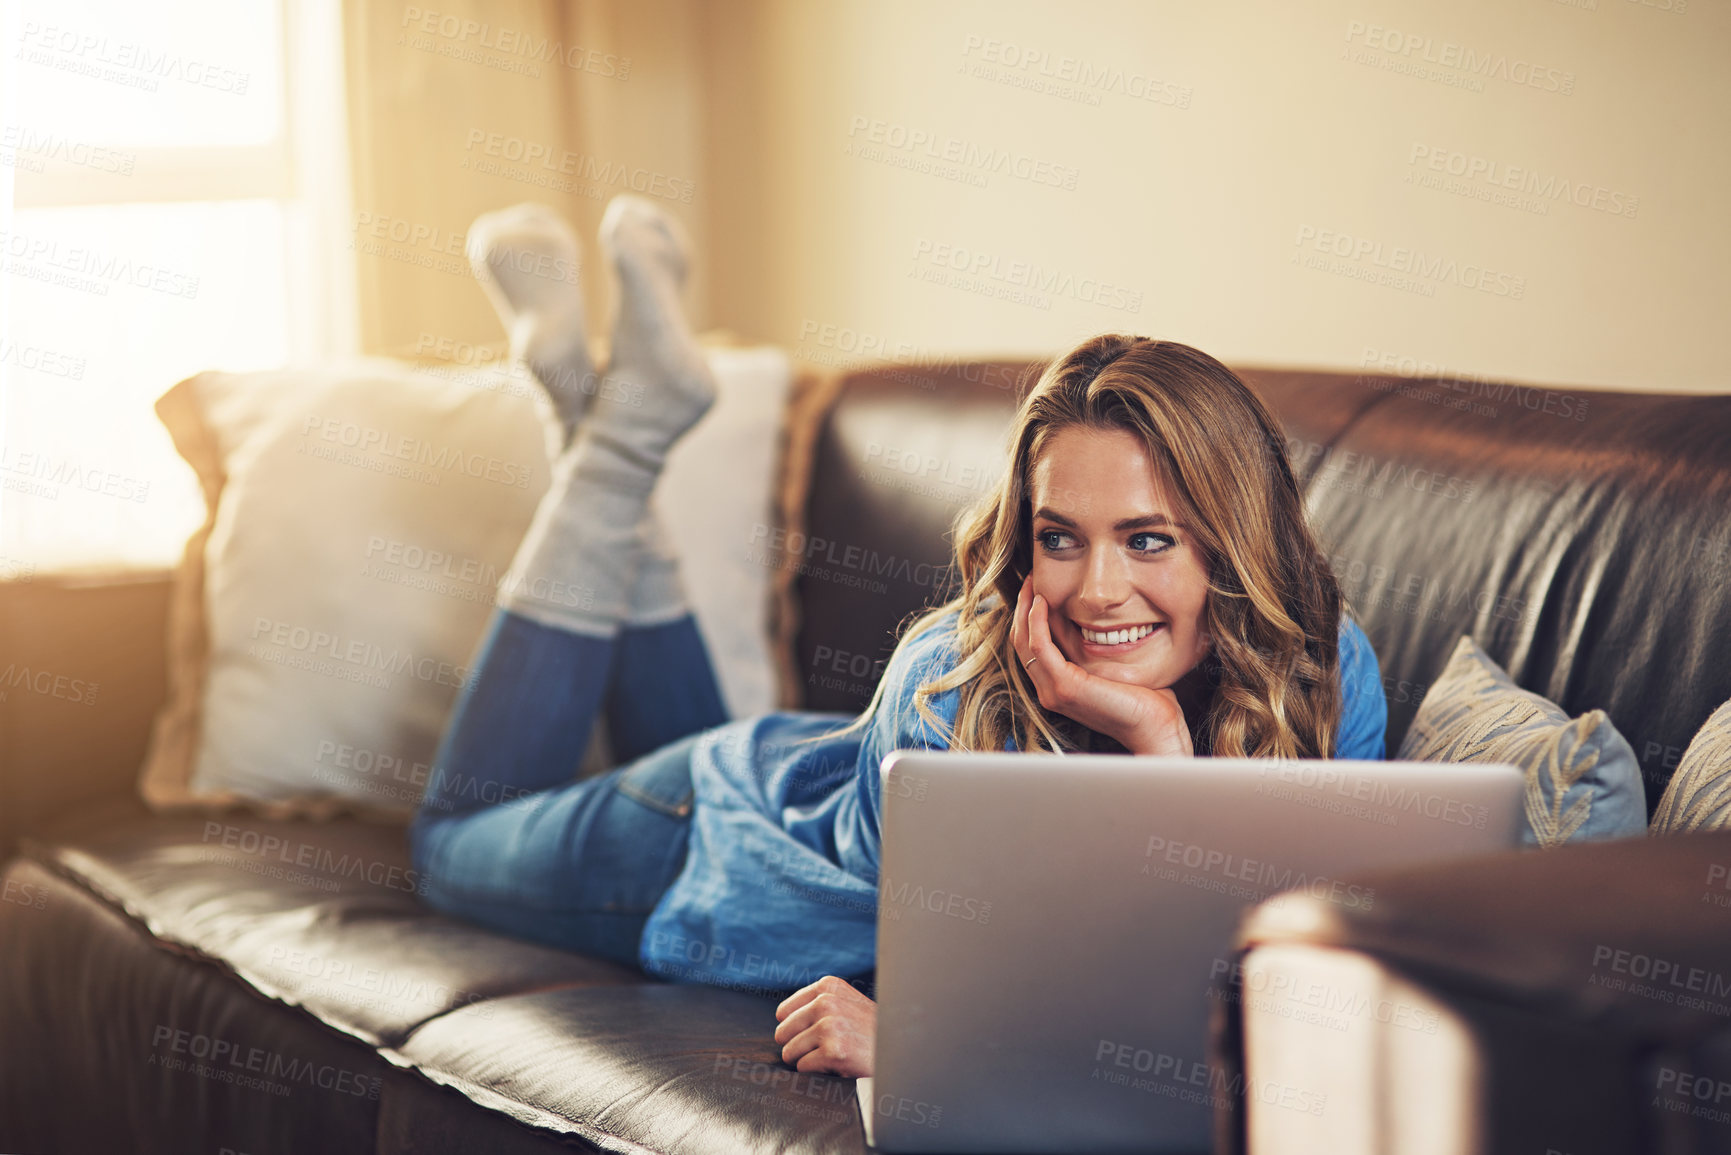 Buy stock photo Shot of a relaxed young woman using a laptop on the sofa at home